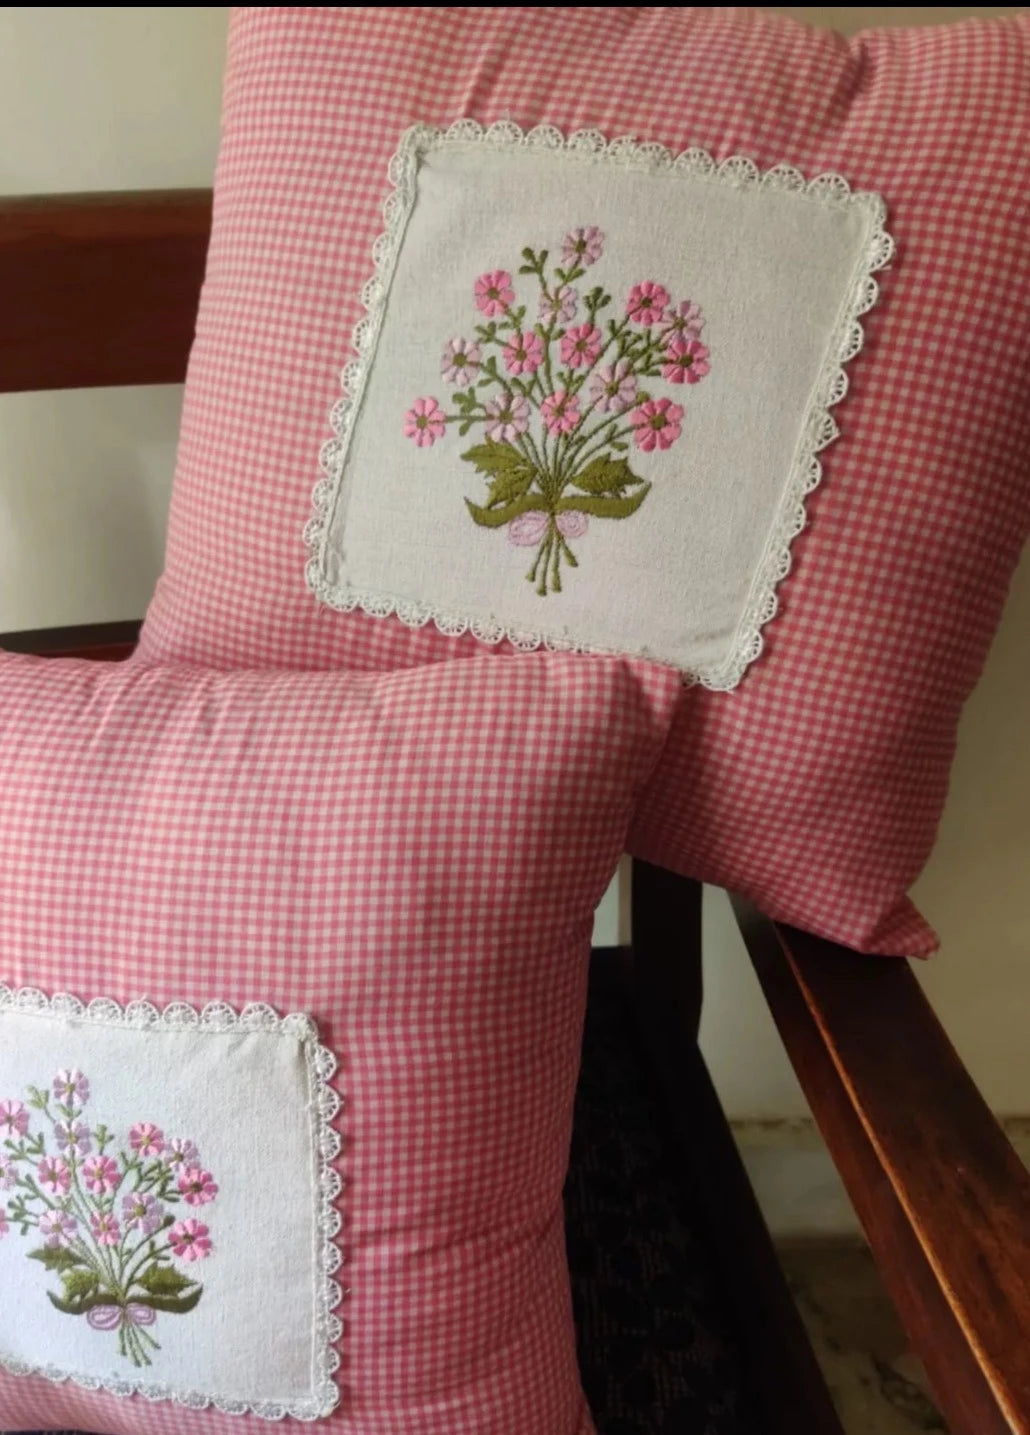 Set of 2:  Gingham Print Floral Embroidered Cushion covers with lace